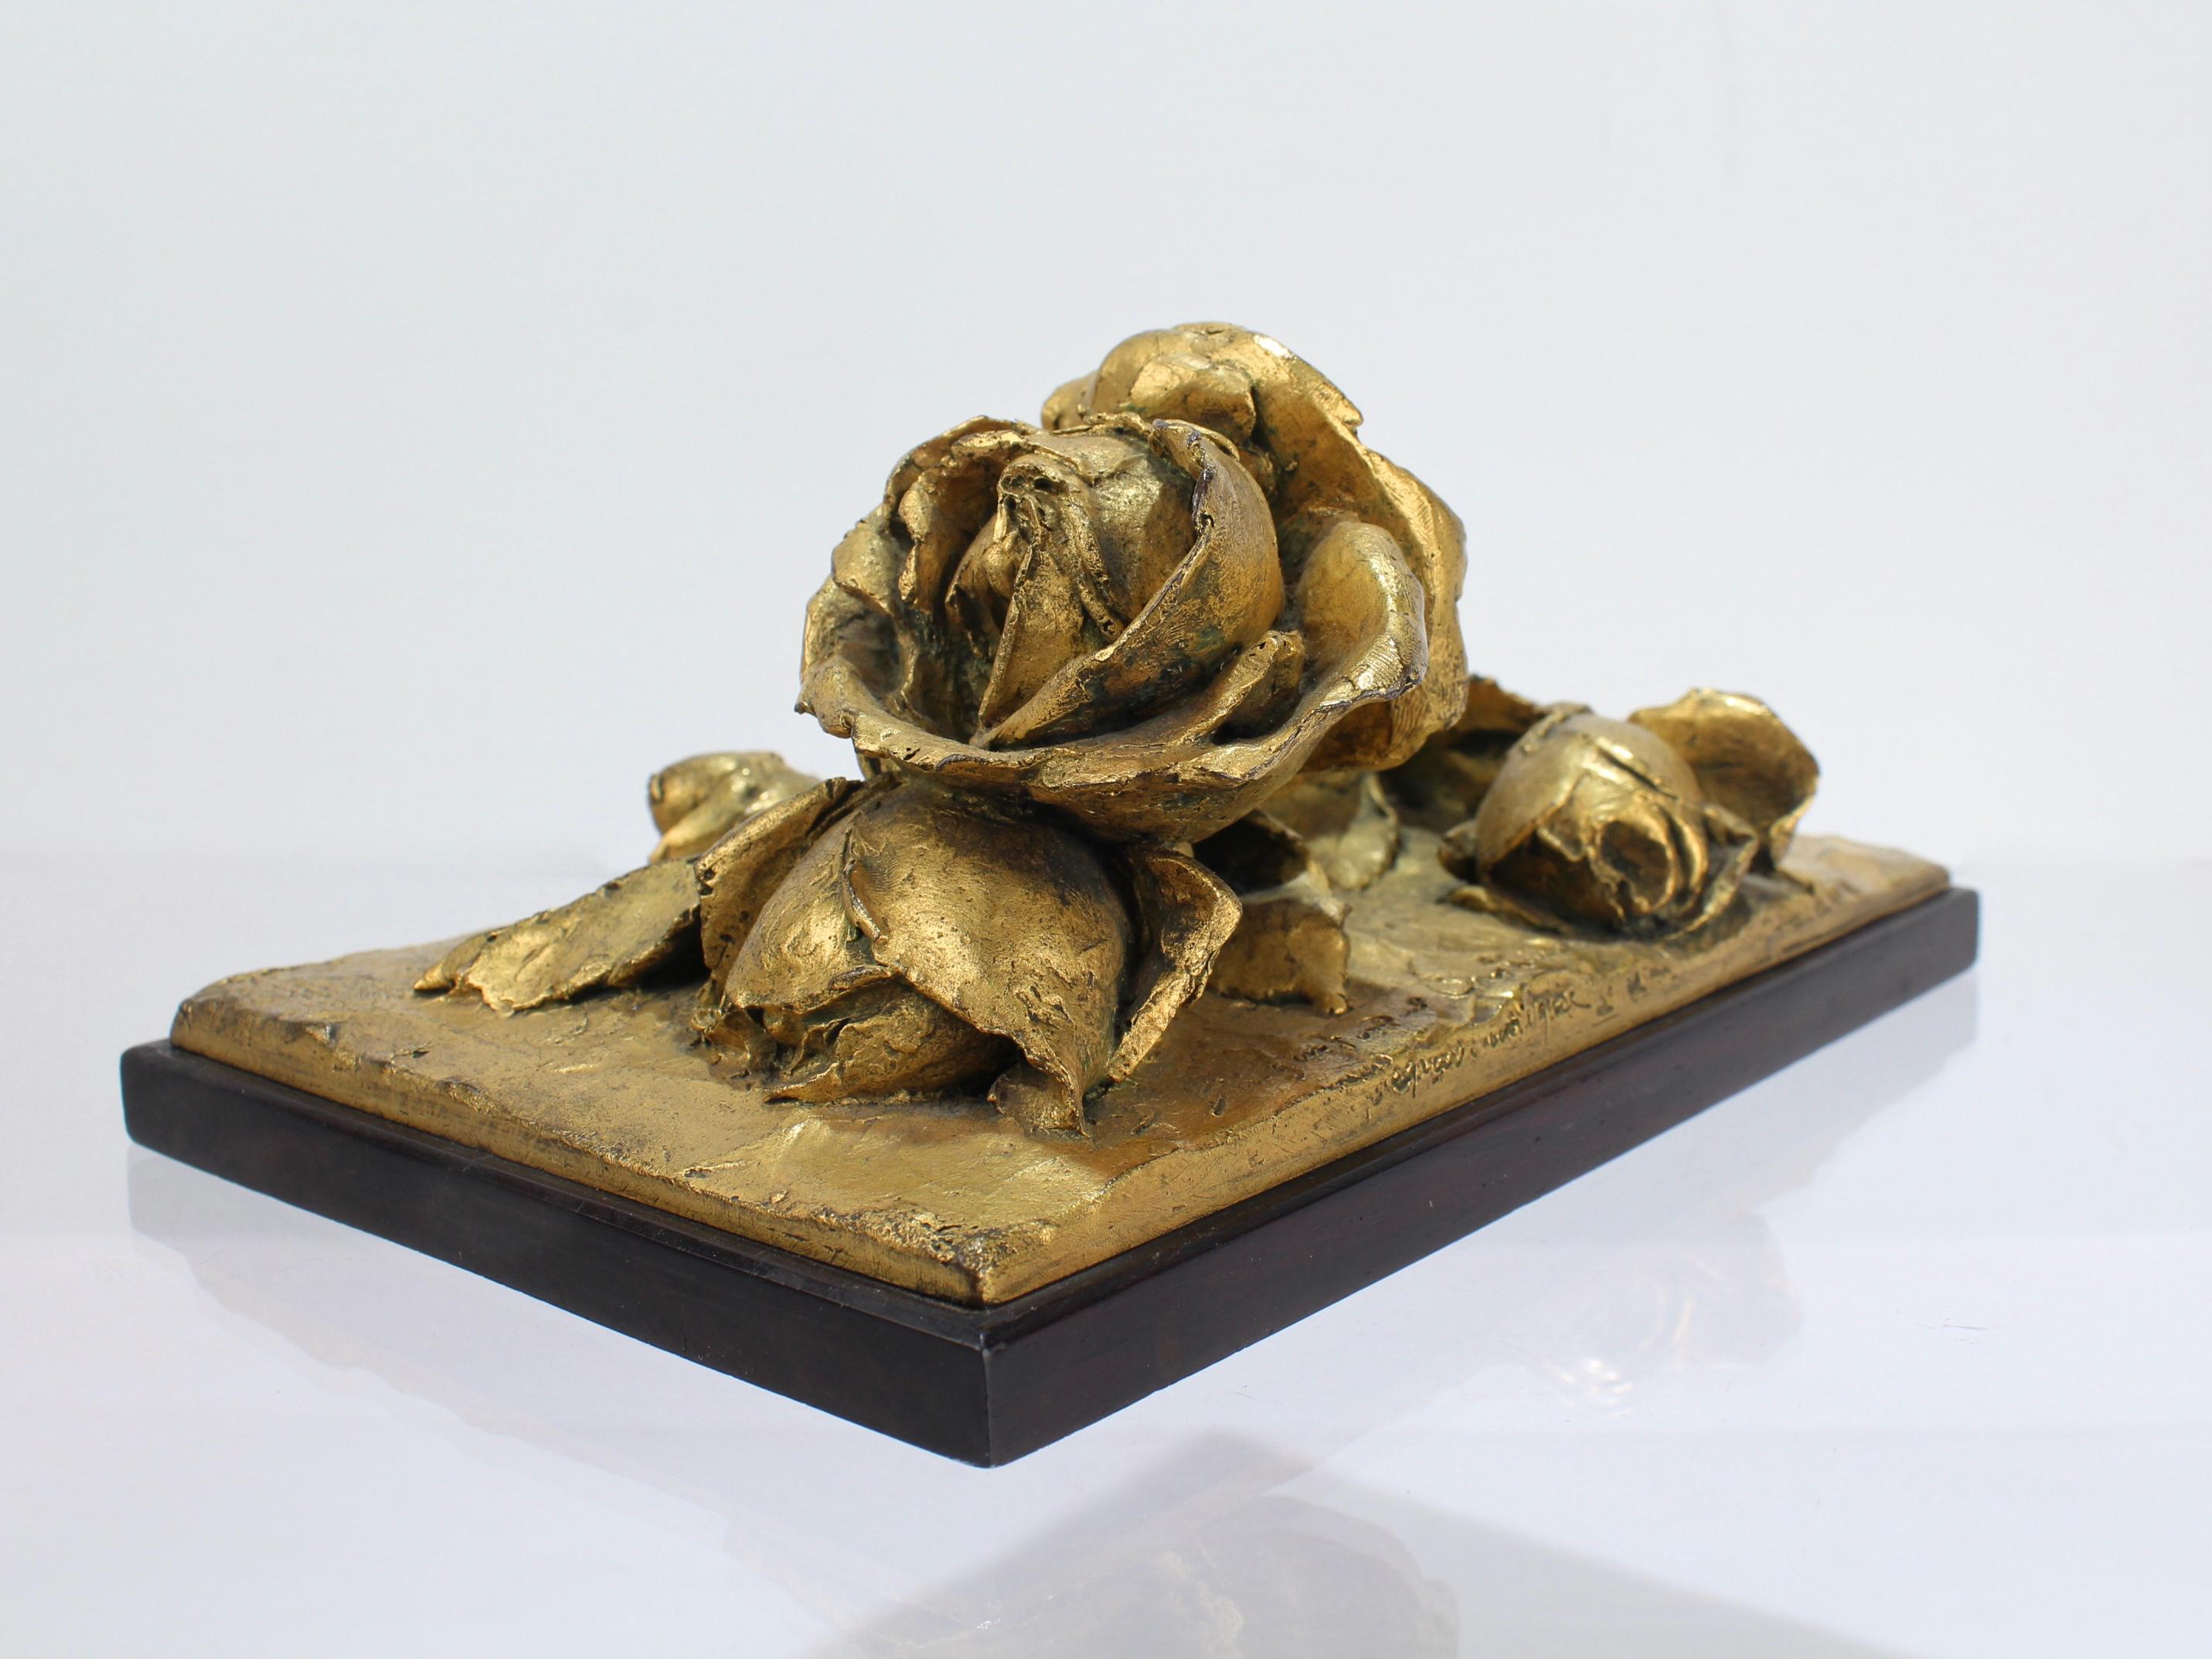 A unique Cire Perdue gilt bronze sculpture of roses by Louis Ernest Barrias.

The singular lost wax cast of a still life of roses is mounted on a rosewood plinth.

Signed in the plinth 